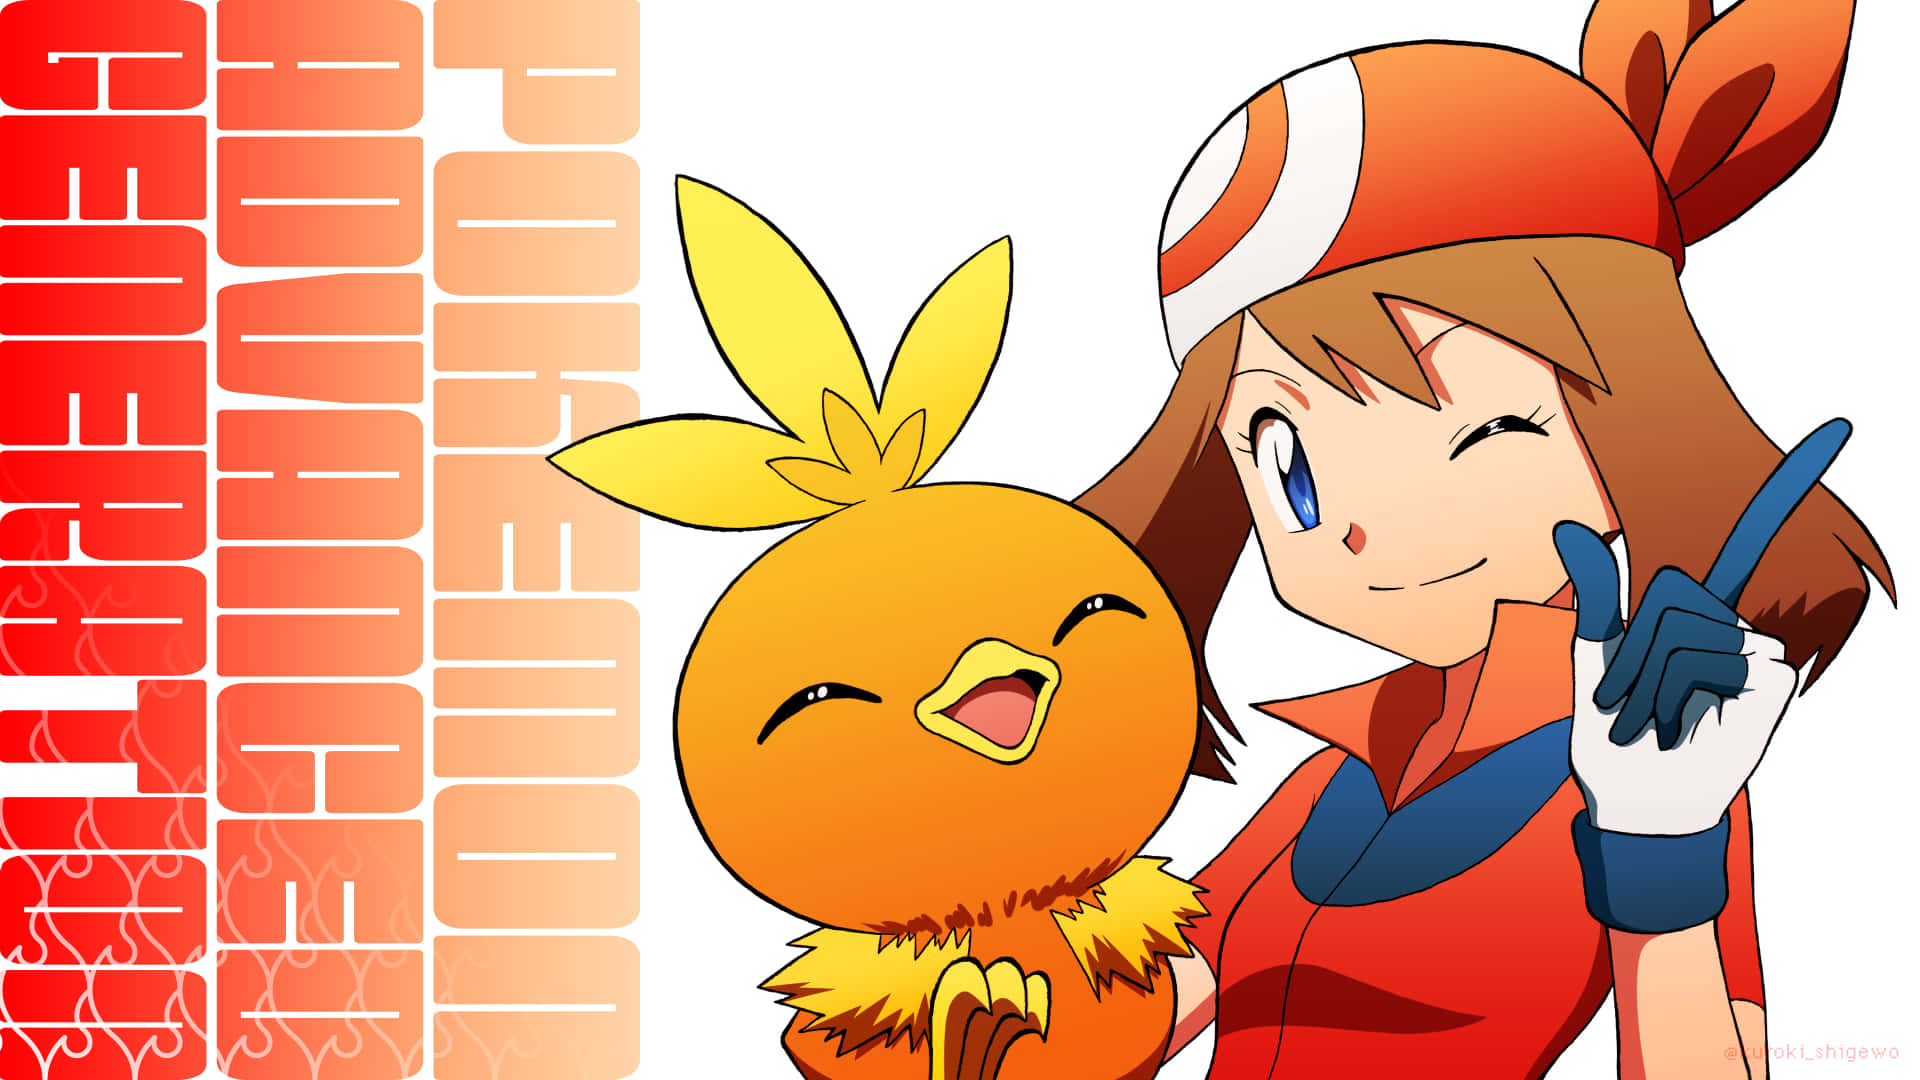 Adorable Illustration Of Mana And Torchic Wallpaper